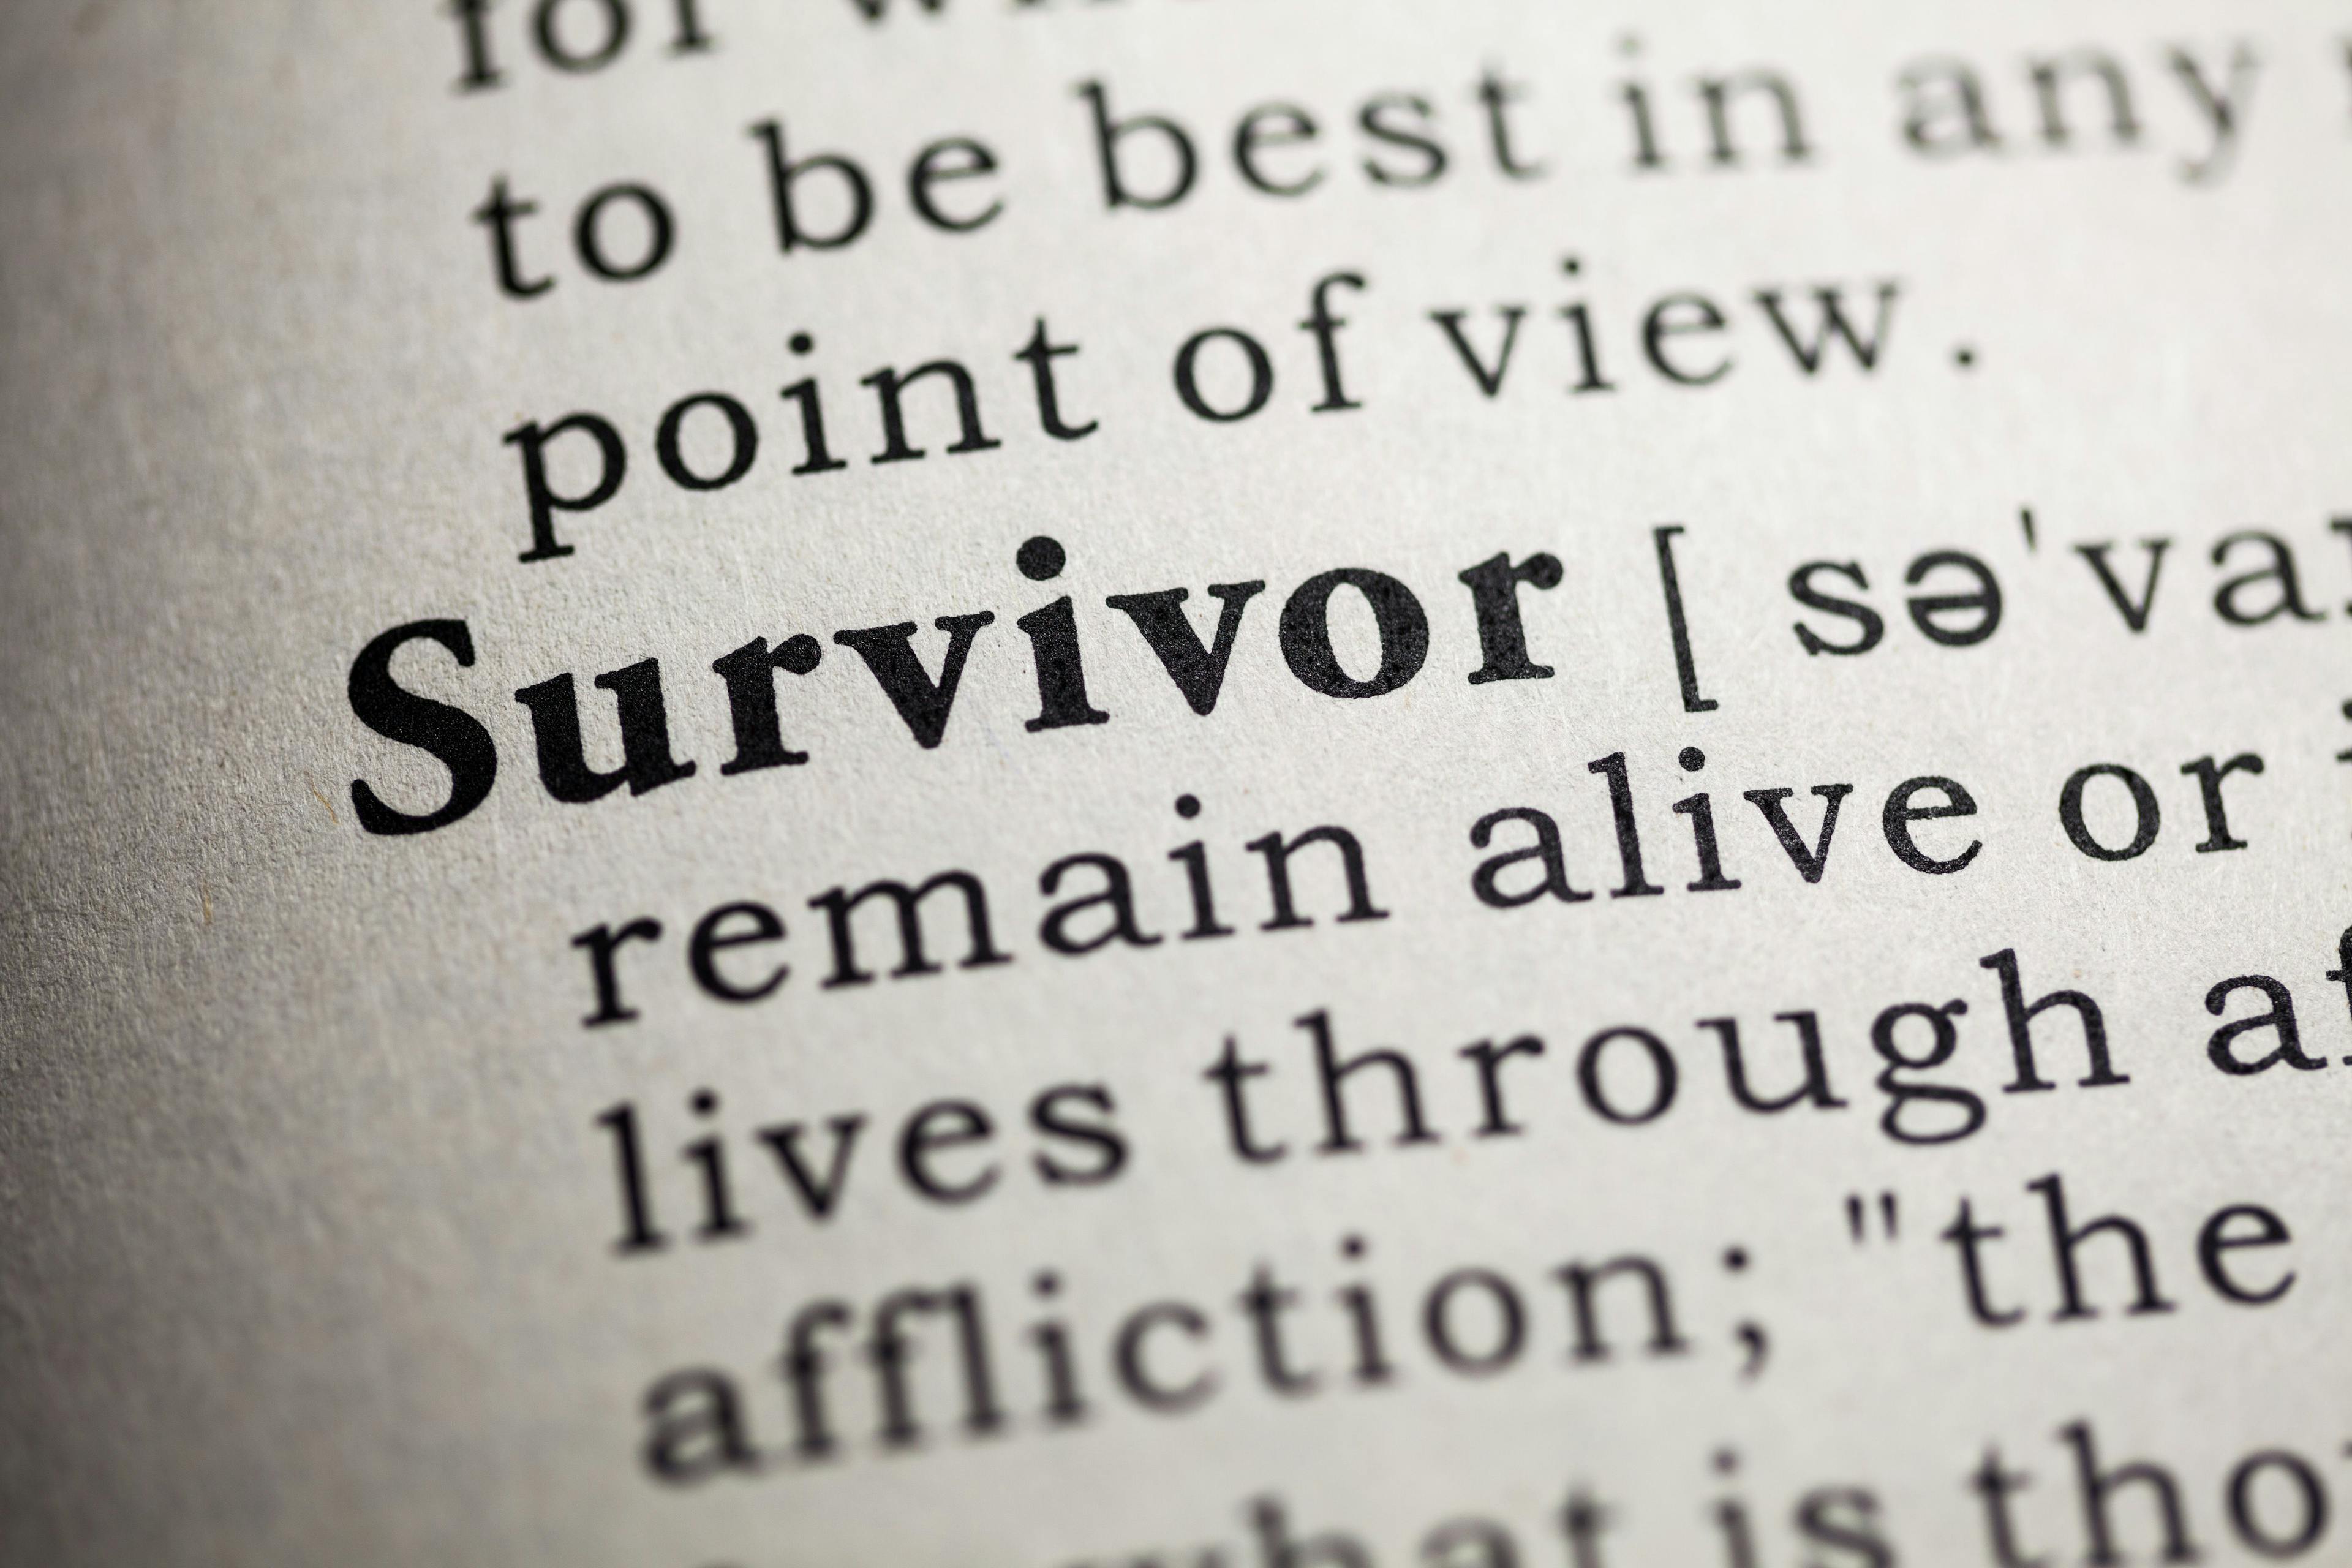 Image of a dictionary definition of the word "Survivor"